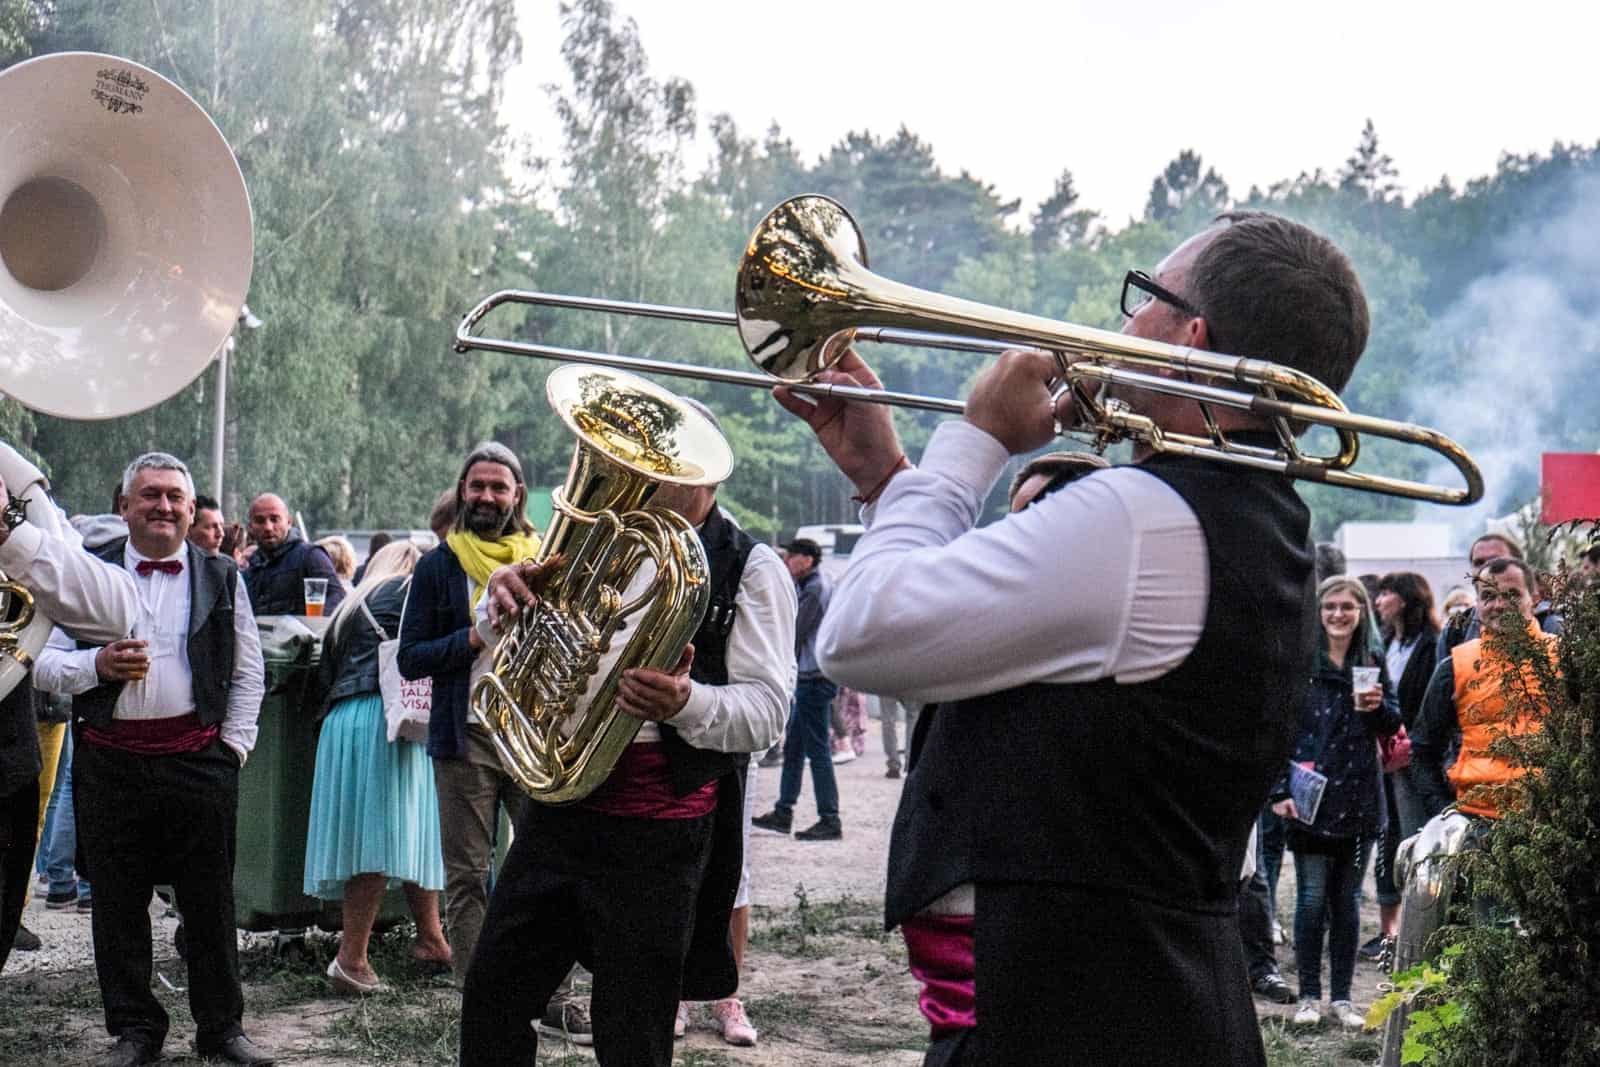 A band plays in the park during the closing show of the Latvia Song and Dance Celebration